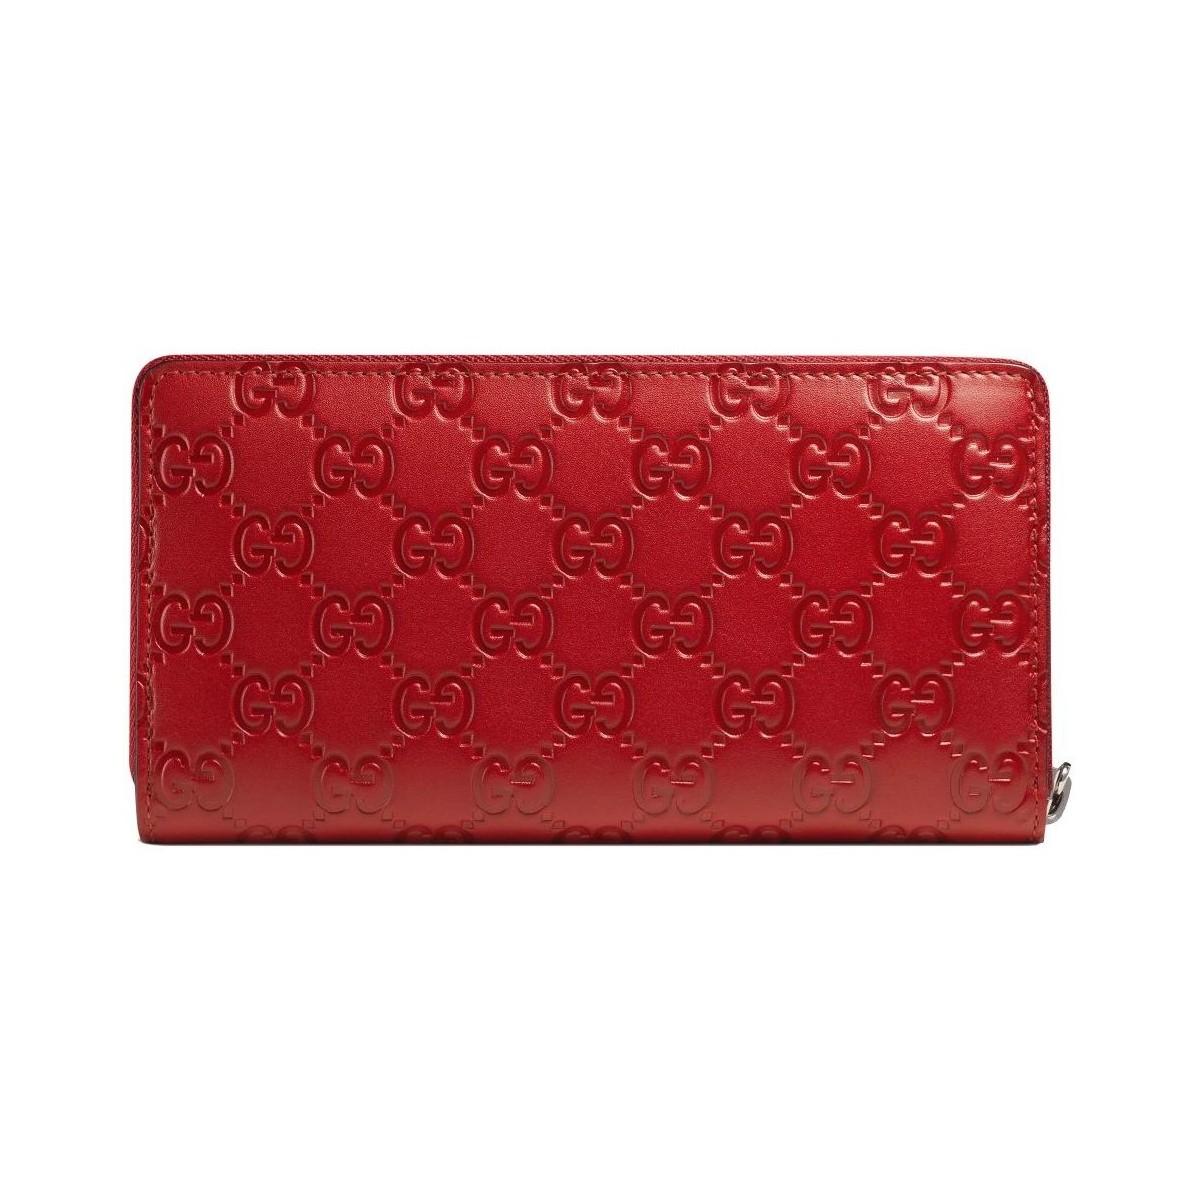 Lyst - Gucci Signature Zip Around Wallet in Red for Men